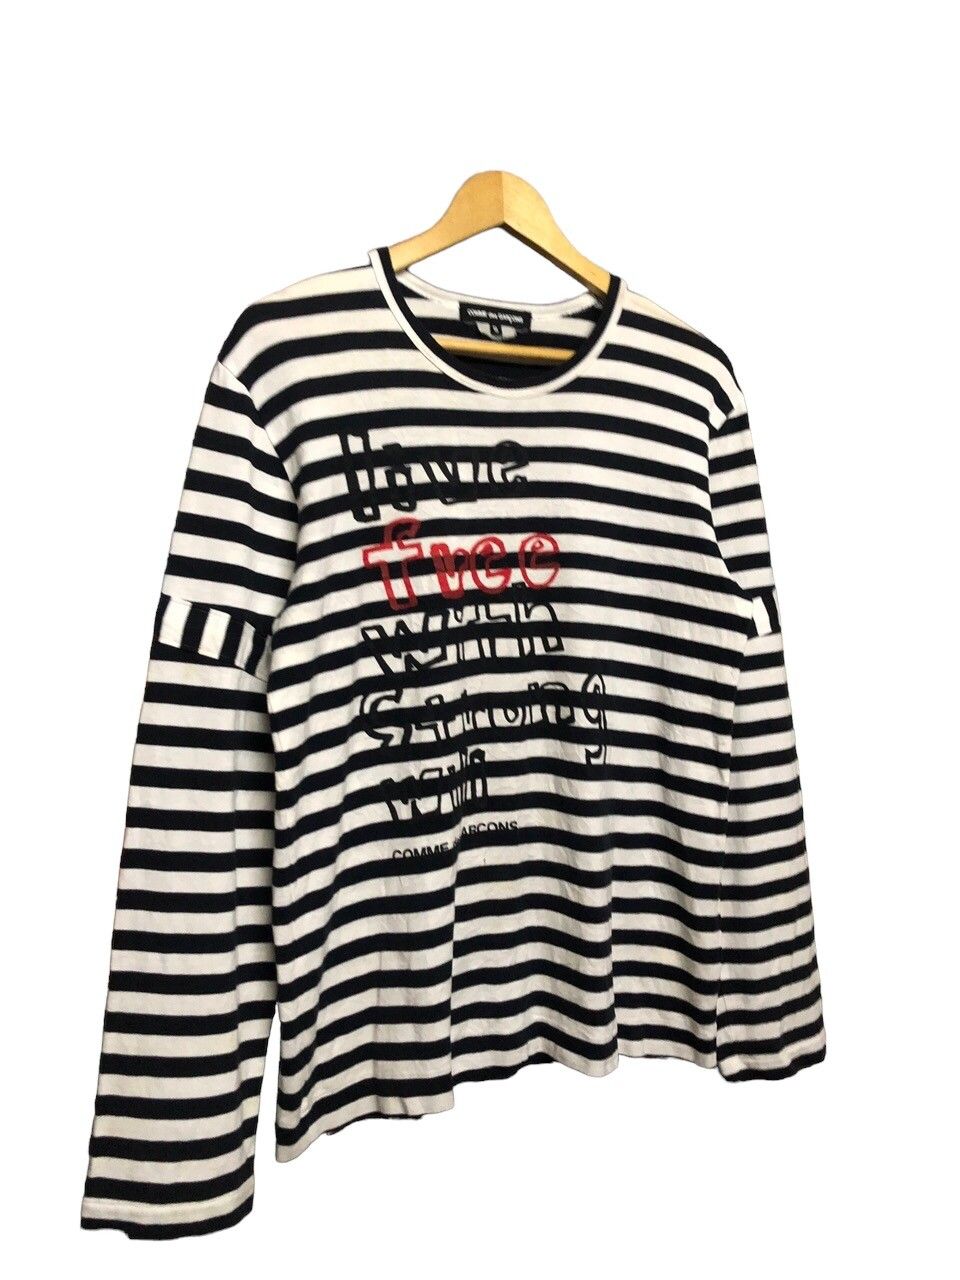 Rare🔥Cdg Poem *Live Free With Strong Wili*Striped Tee - 6